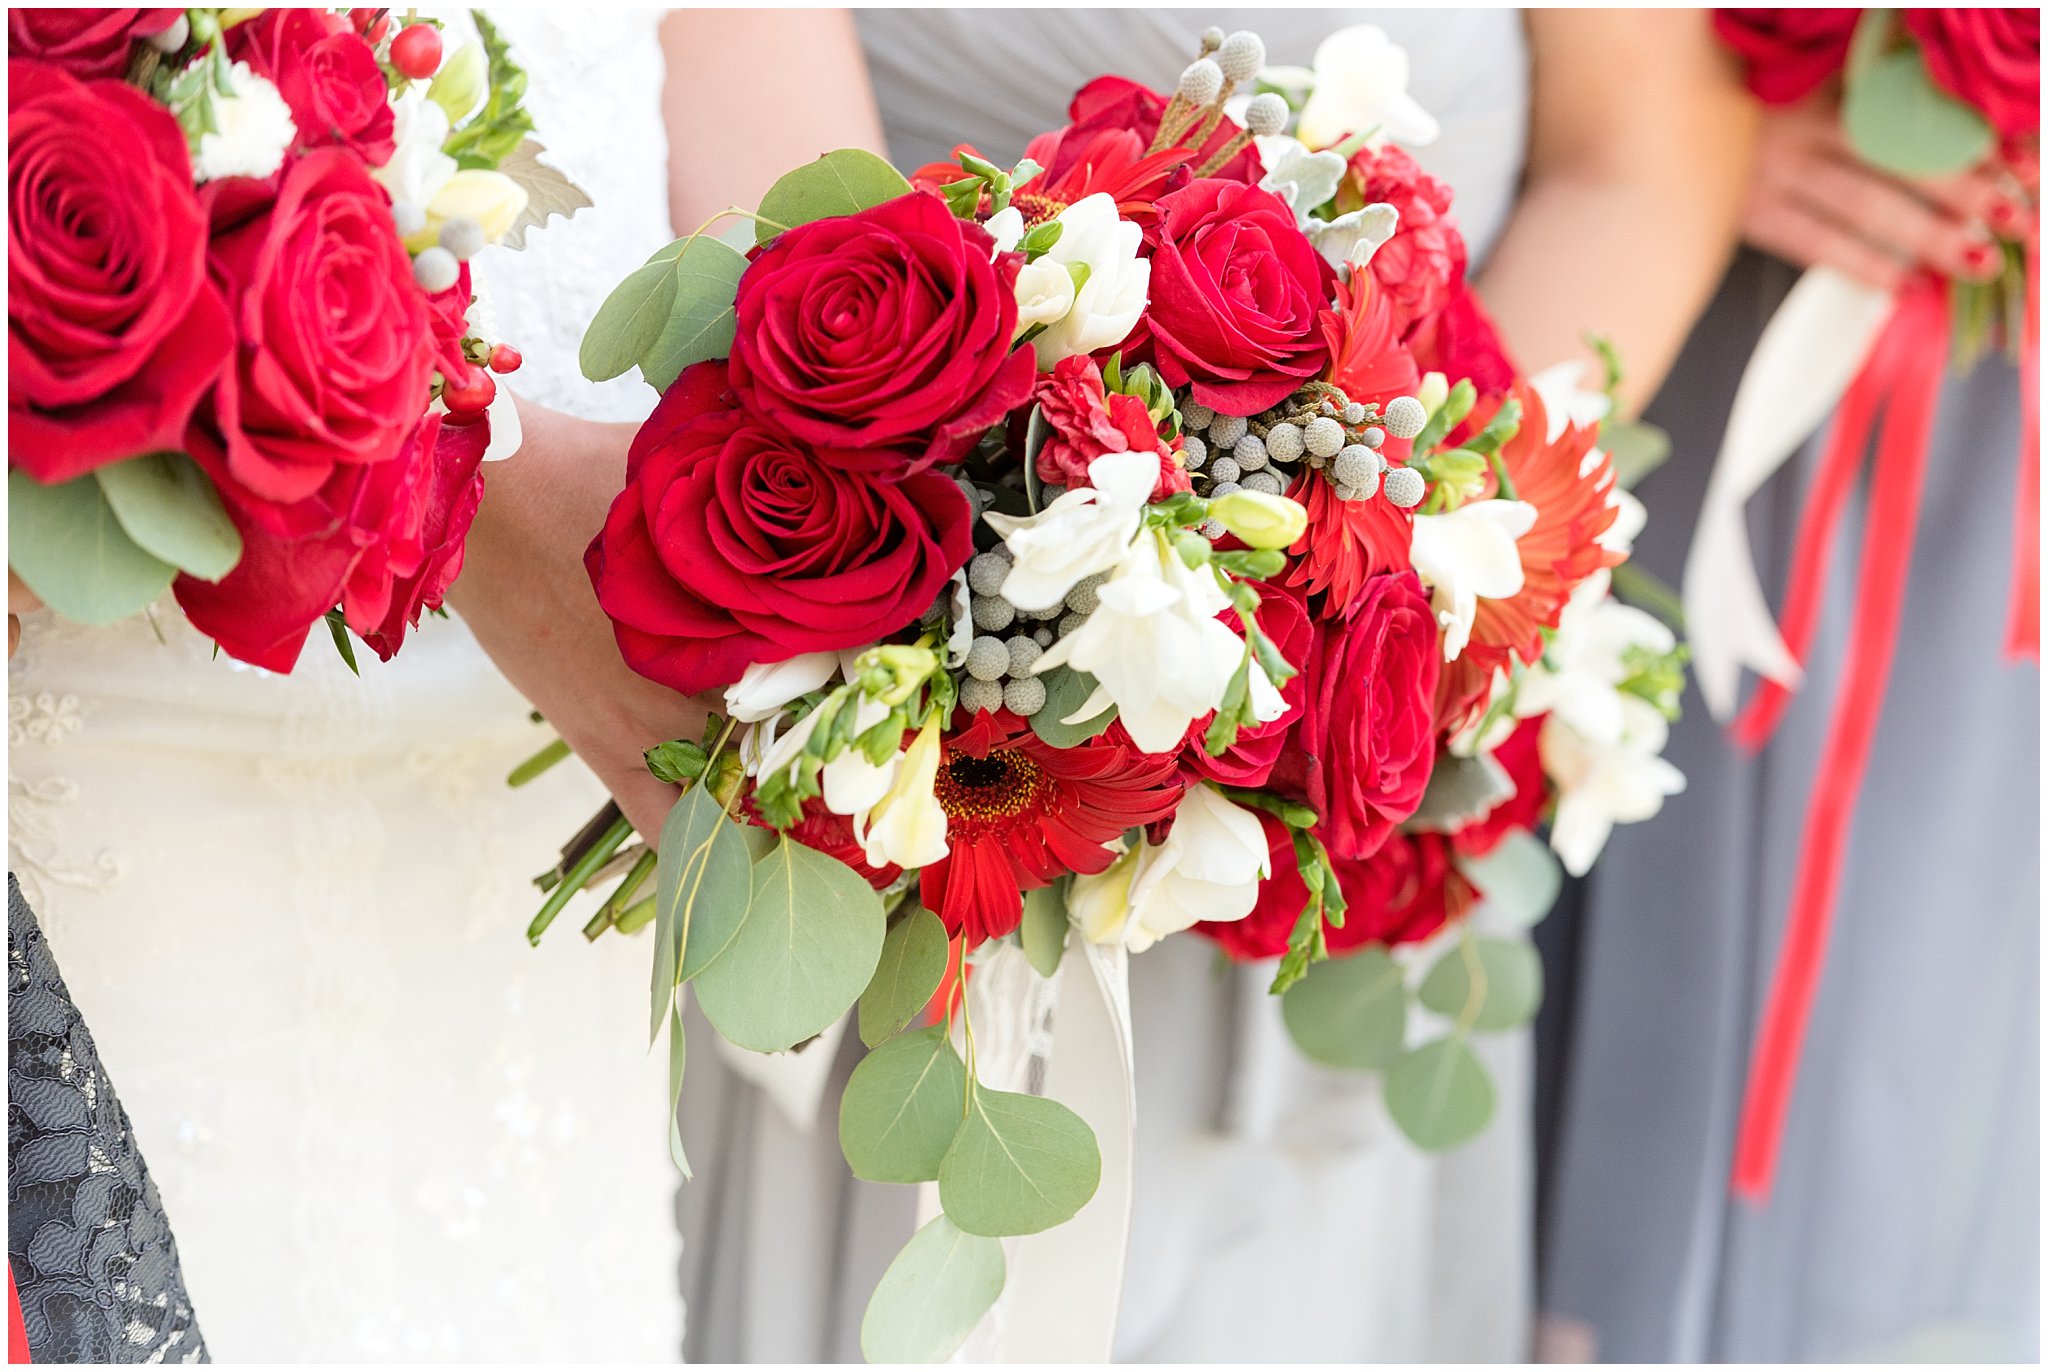 Dancing Daisies Floral | Detail and close up of bride and bridesmaid's red and white wedding bouquets | Davis County Outdoor Wedding | Jessie and Dallin Photography